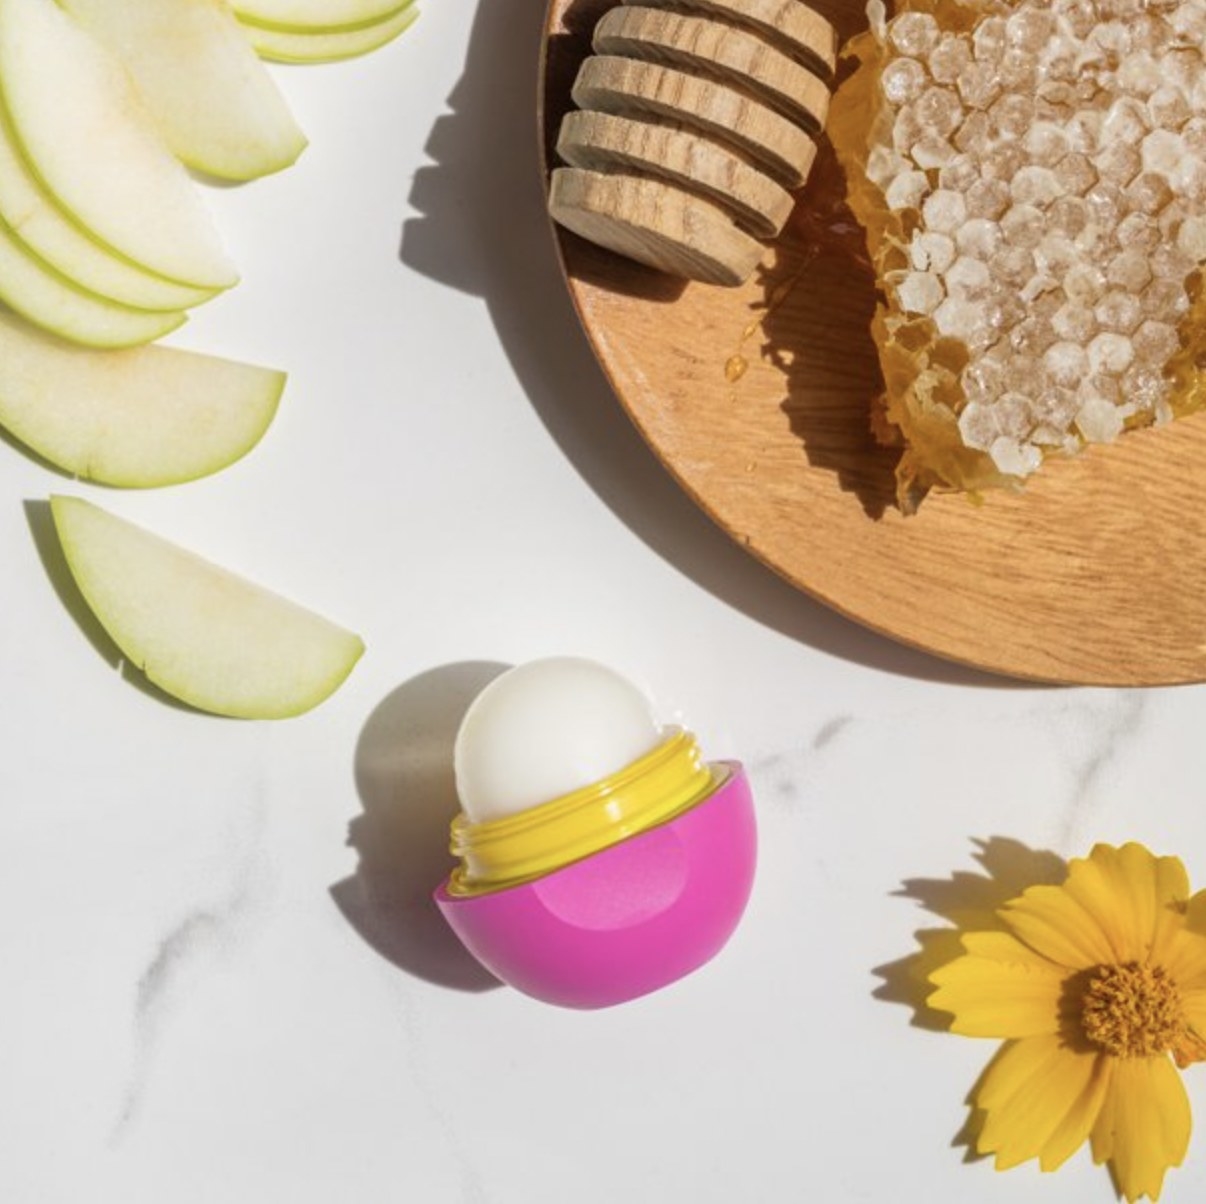 A lip balm sphere with sliced apples and flower buds